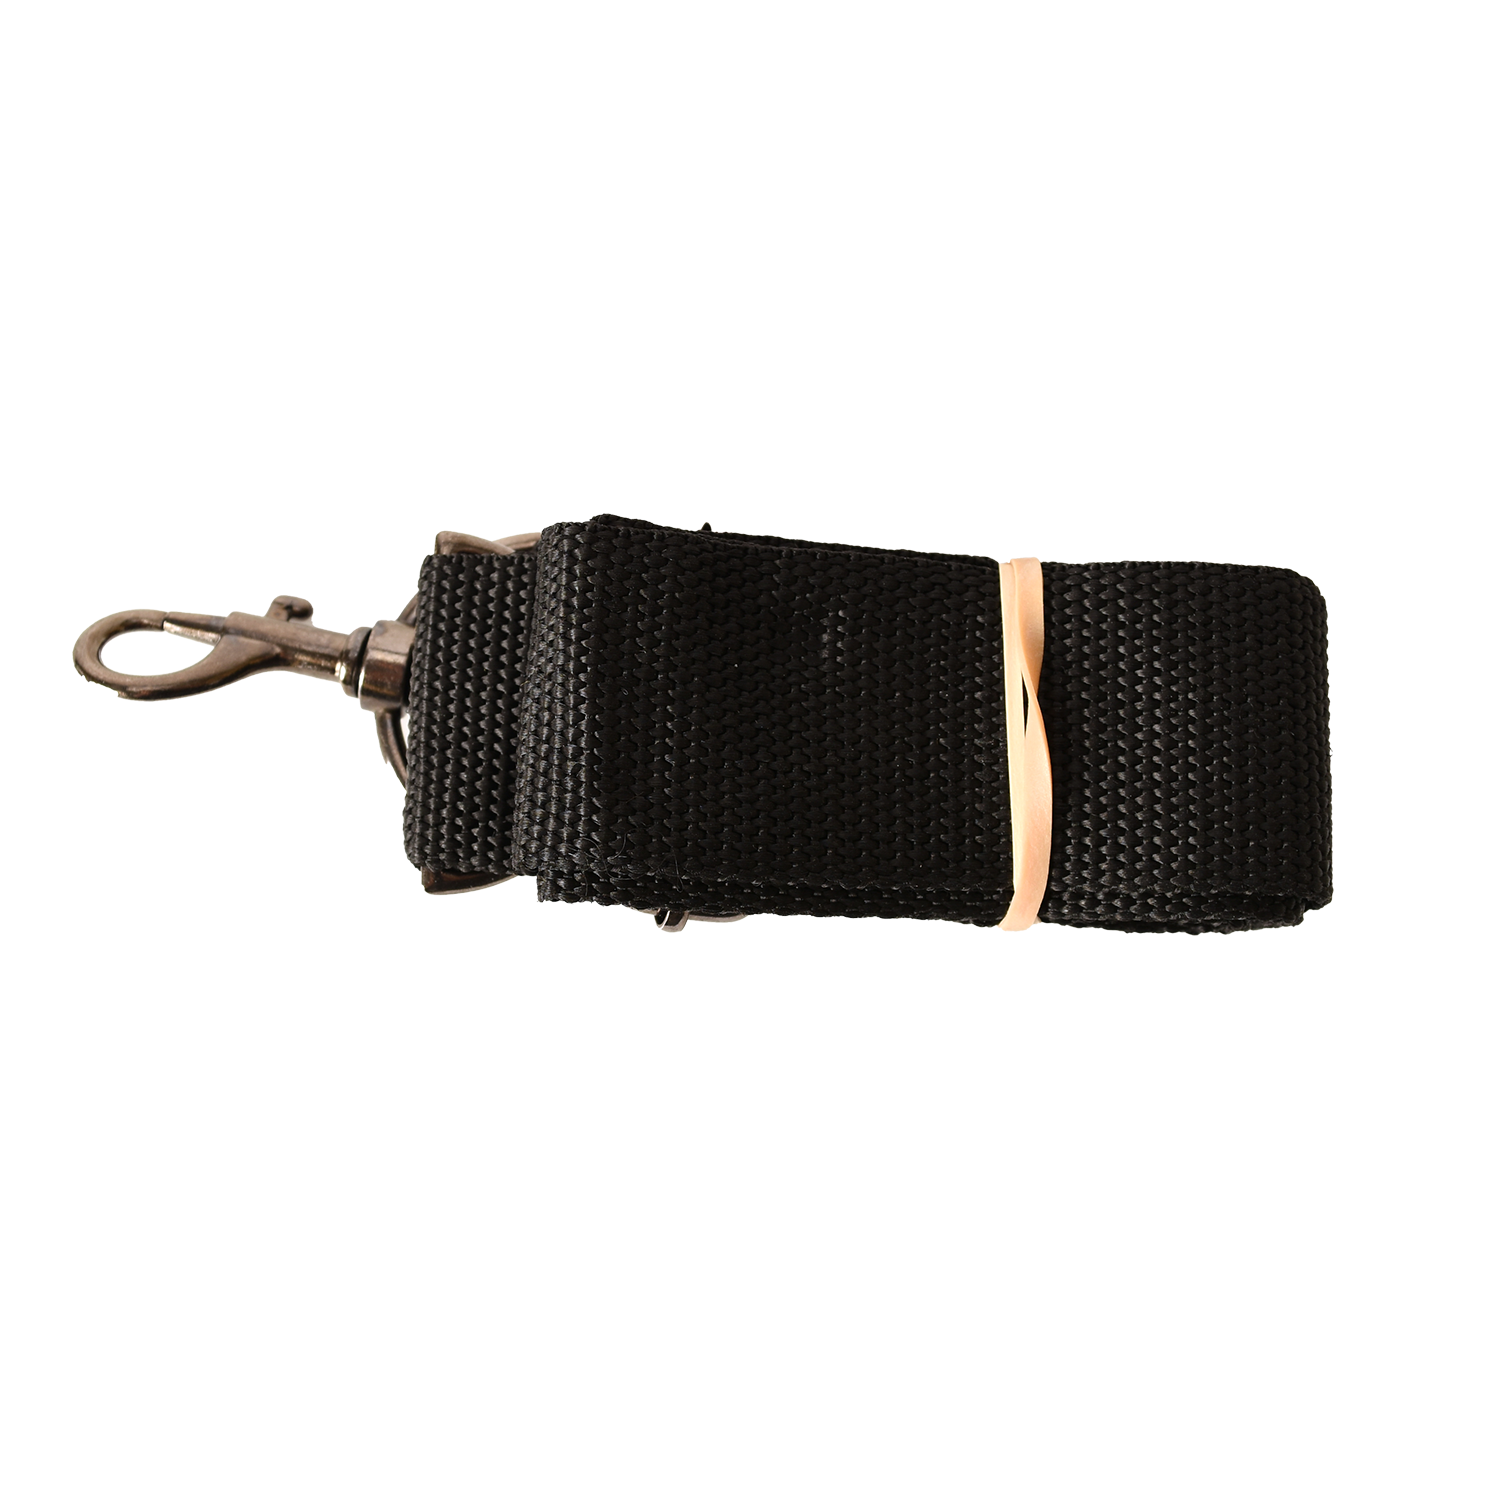 Carrying Strap for Matchless/Sidekick